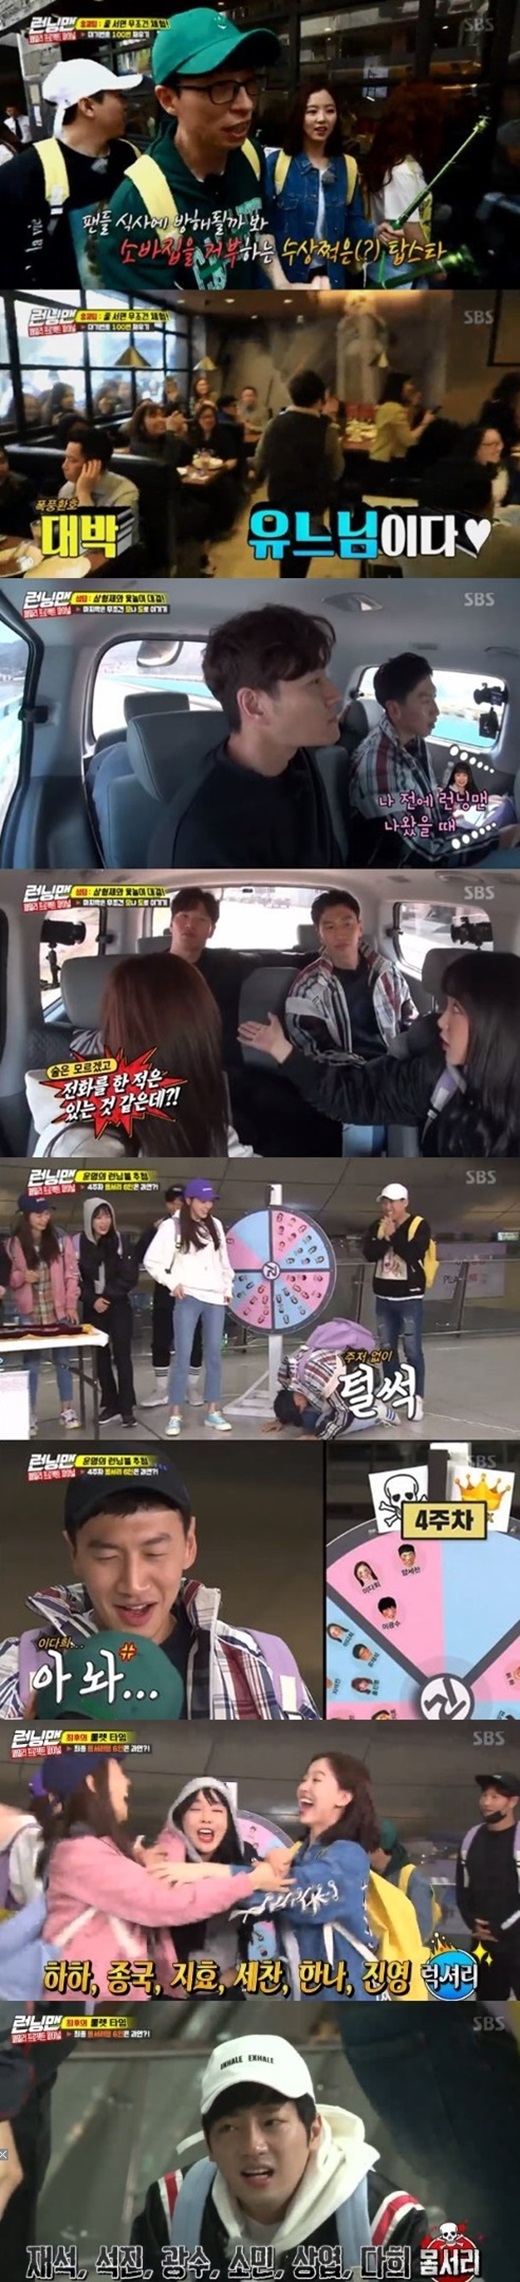 SBS Running Man maintained the top spot in the same time zone entertainment program.According to Nielsen Korea, a ratings agency on the 14th, Running Man broadcast on the 13th recorded 2.7% of the audience rating of 20-49 years old (hereinafter referred to as 2049) and 5% of the audience rating of 2 parts (based on households in the metropolitan area), beating Happy Sunday (3.4%) and Masked Wang (2.7%)In addition, it is the third overall record of the Sunday entertainment program broadcast on the day. The first place was Ugly Our Little and the second was Death and Deacon.The average audience rating also rose to 4.9% in the first part and 7.9% in the second part, and the highest audience rating soared to 8.8%.Yoo Jae-Suk, Jeon So-min, Ji Seok-jin, Lee Kwang-soo, Lee Sang-yeob and Lee Da-hee left British Body Tour, and Kim Jong-guk, Haha, Hong Jin-young, Yang Se-chan, Kang Han-Na and Song Ji-hyo were members of Swiss Luxury Tour The confirmed figure was on the air.The scene rose to 8.8 percent, taking up the best minute.On the other hand, the Family Project Final race was held after last week, and actors Lee Sang-yeob, Lee Da-hee, Kang Han-Na and singer Hong Jin-young were together.